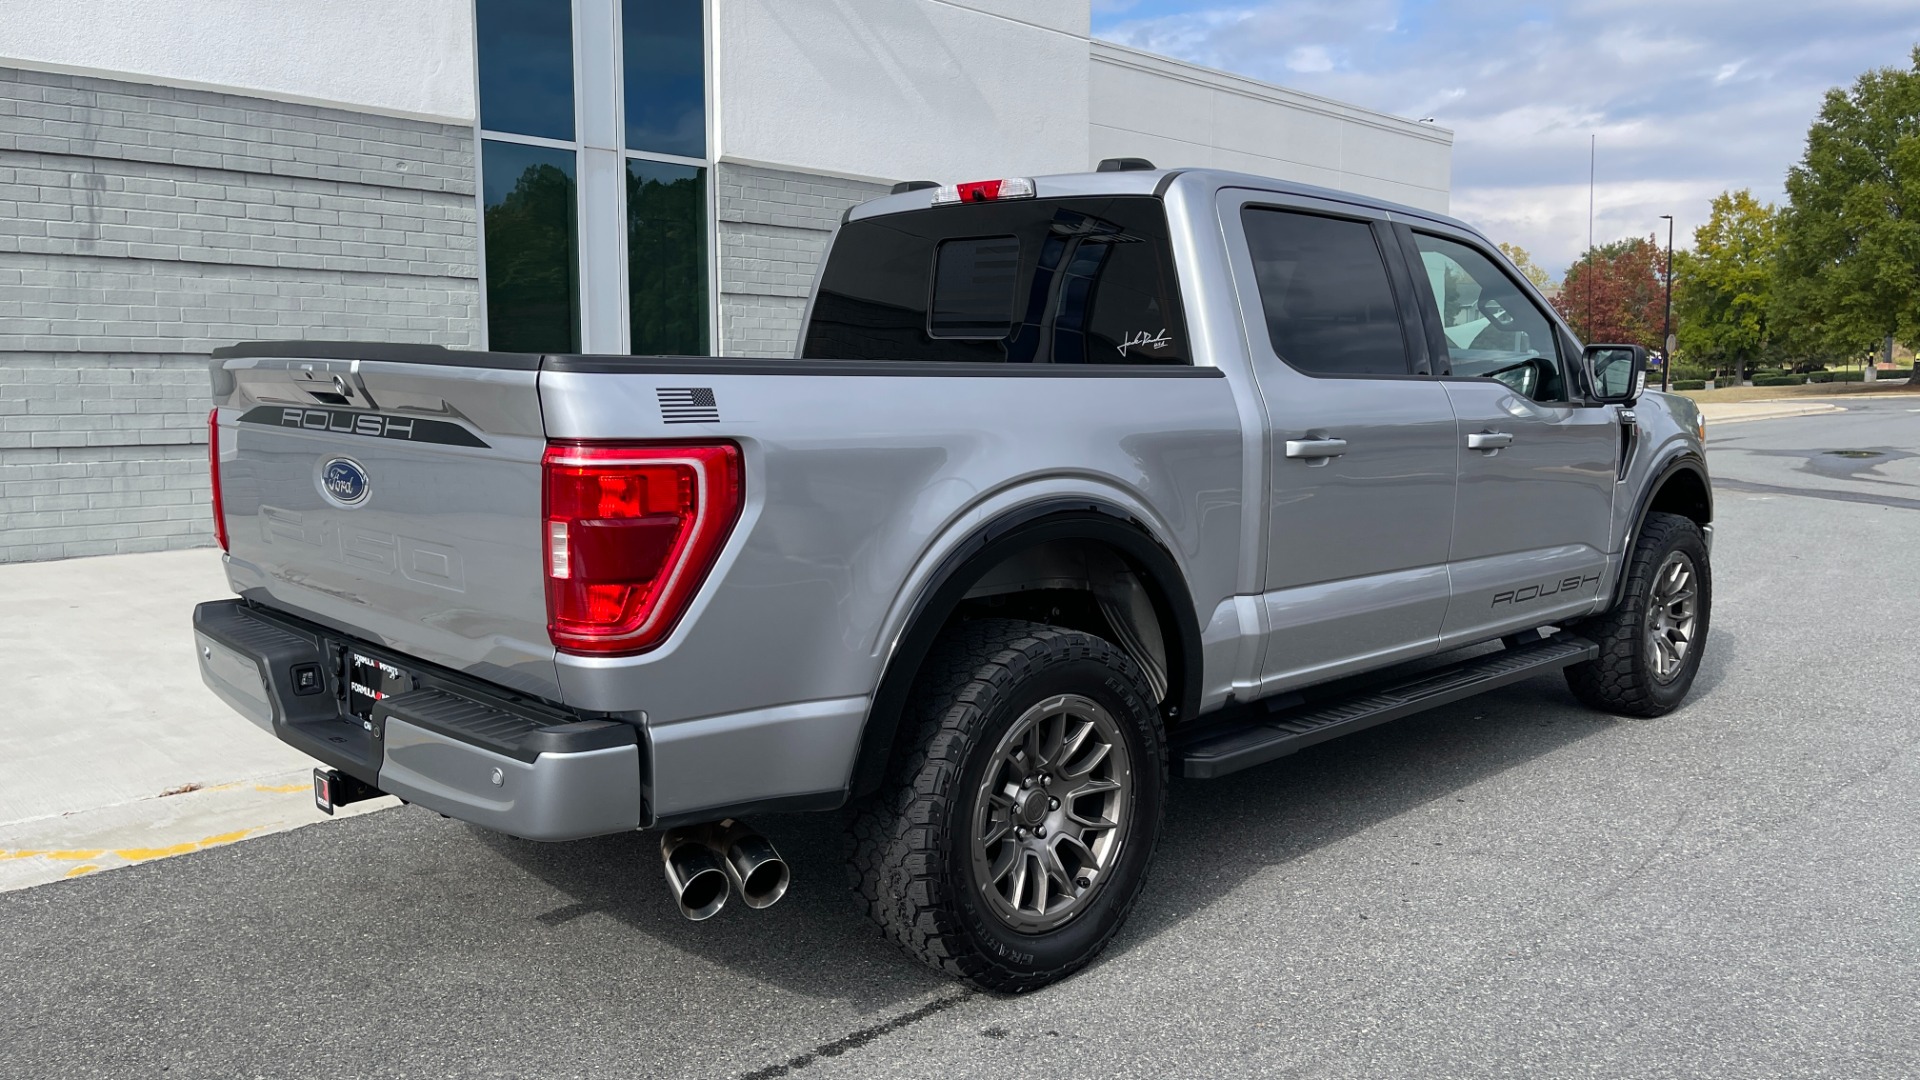 Used 2021 Ford F-150 ROUSH / 5.0 V8 / LEATHER / ACTIVE EXHAUST / FOX SHOCKS / CONSOLE SAFE for sale $69,985 at Formula Imports in Charlotte NC 28227 5